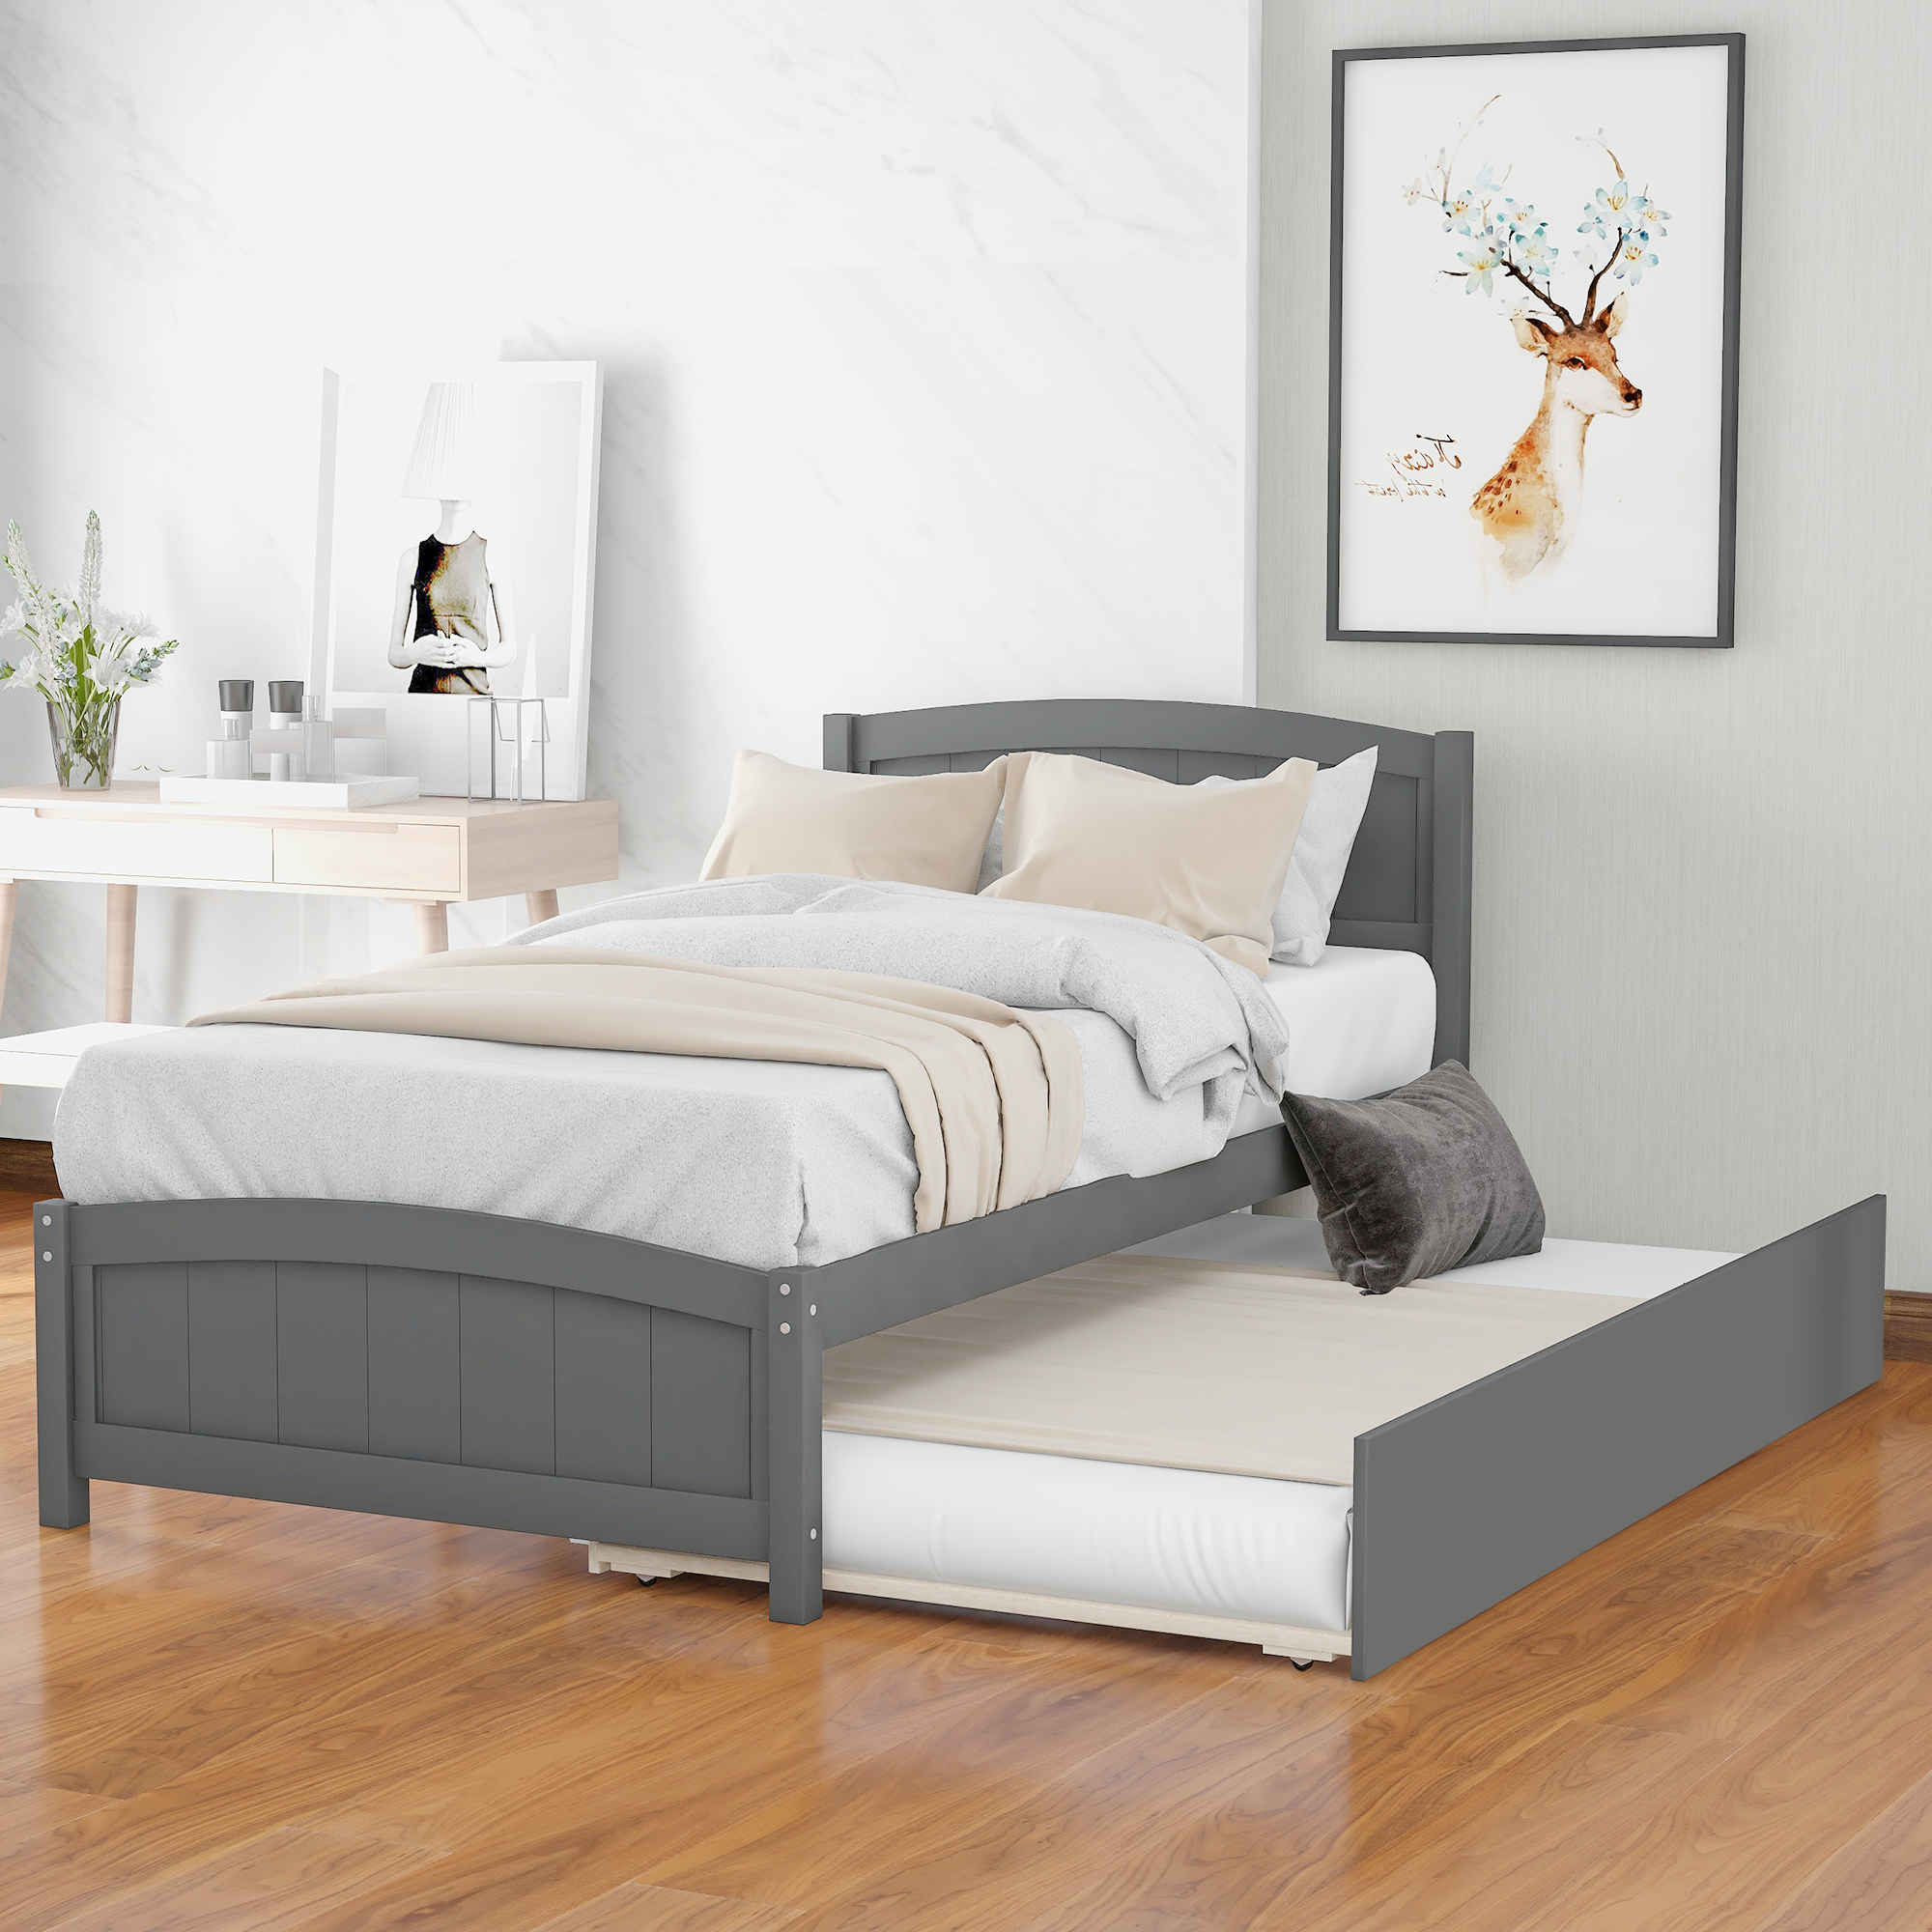 Details about    Faux Leather Upholstered Platform Bed Wooden Slats Twin Size Modern Bed BALCK 